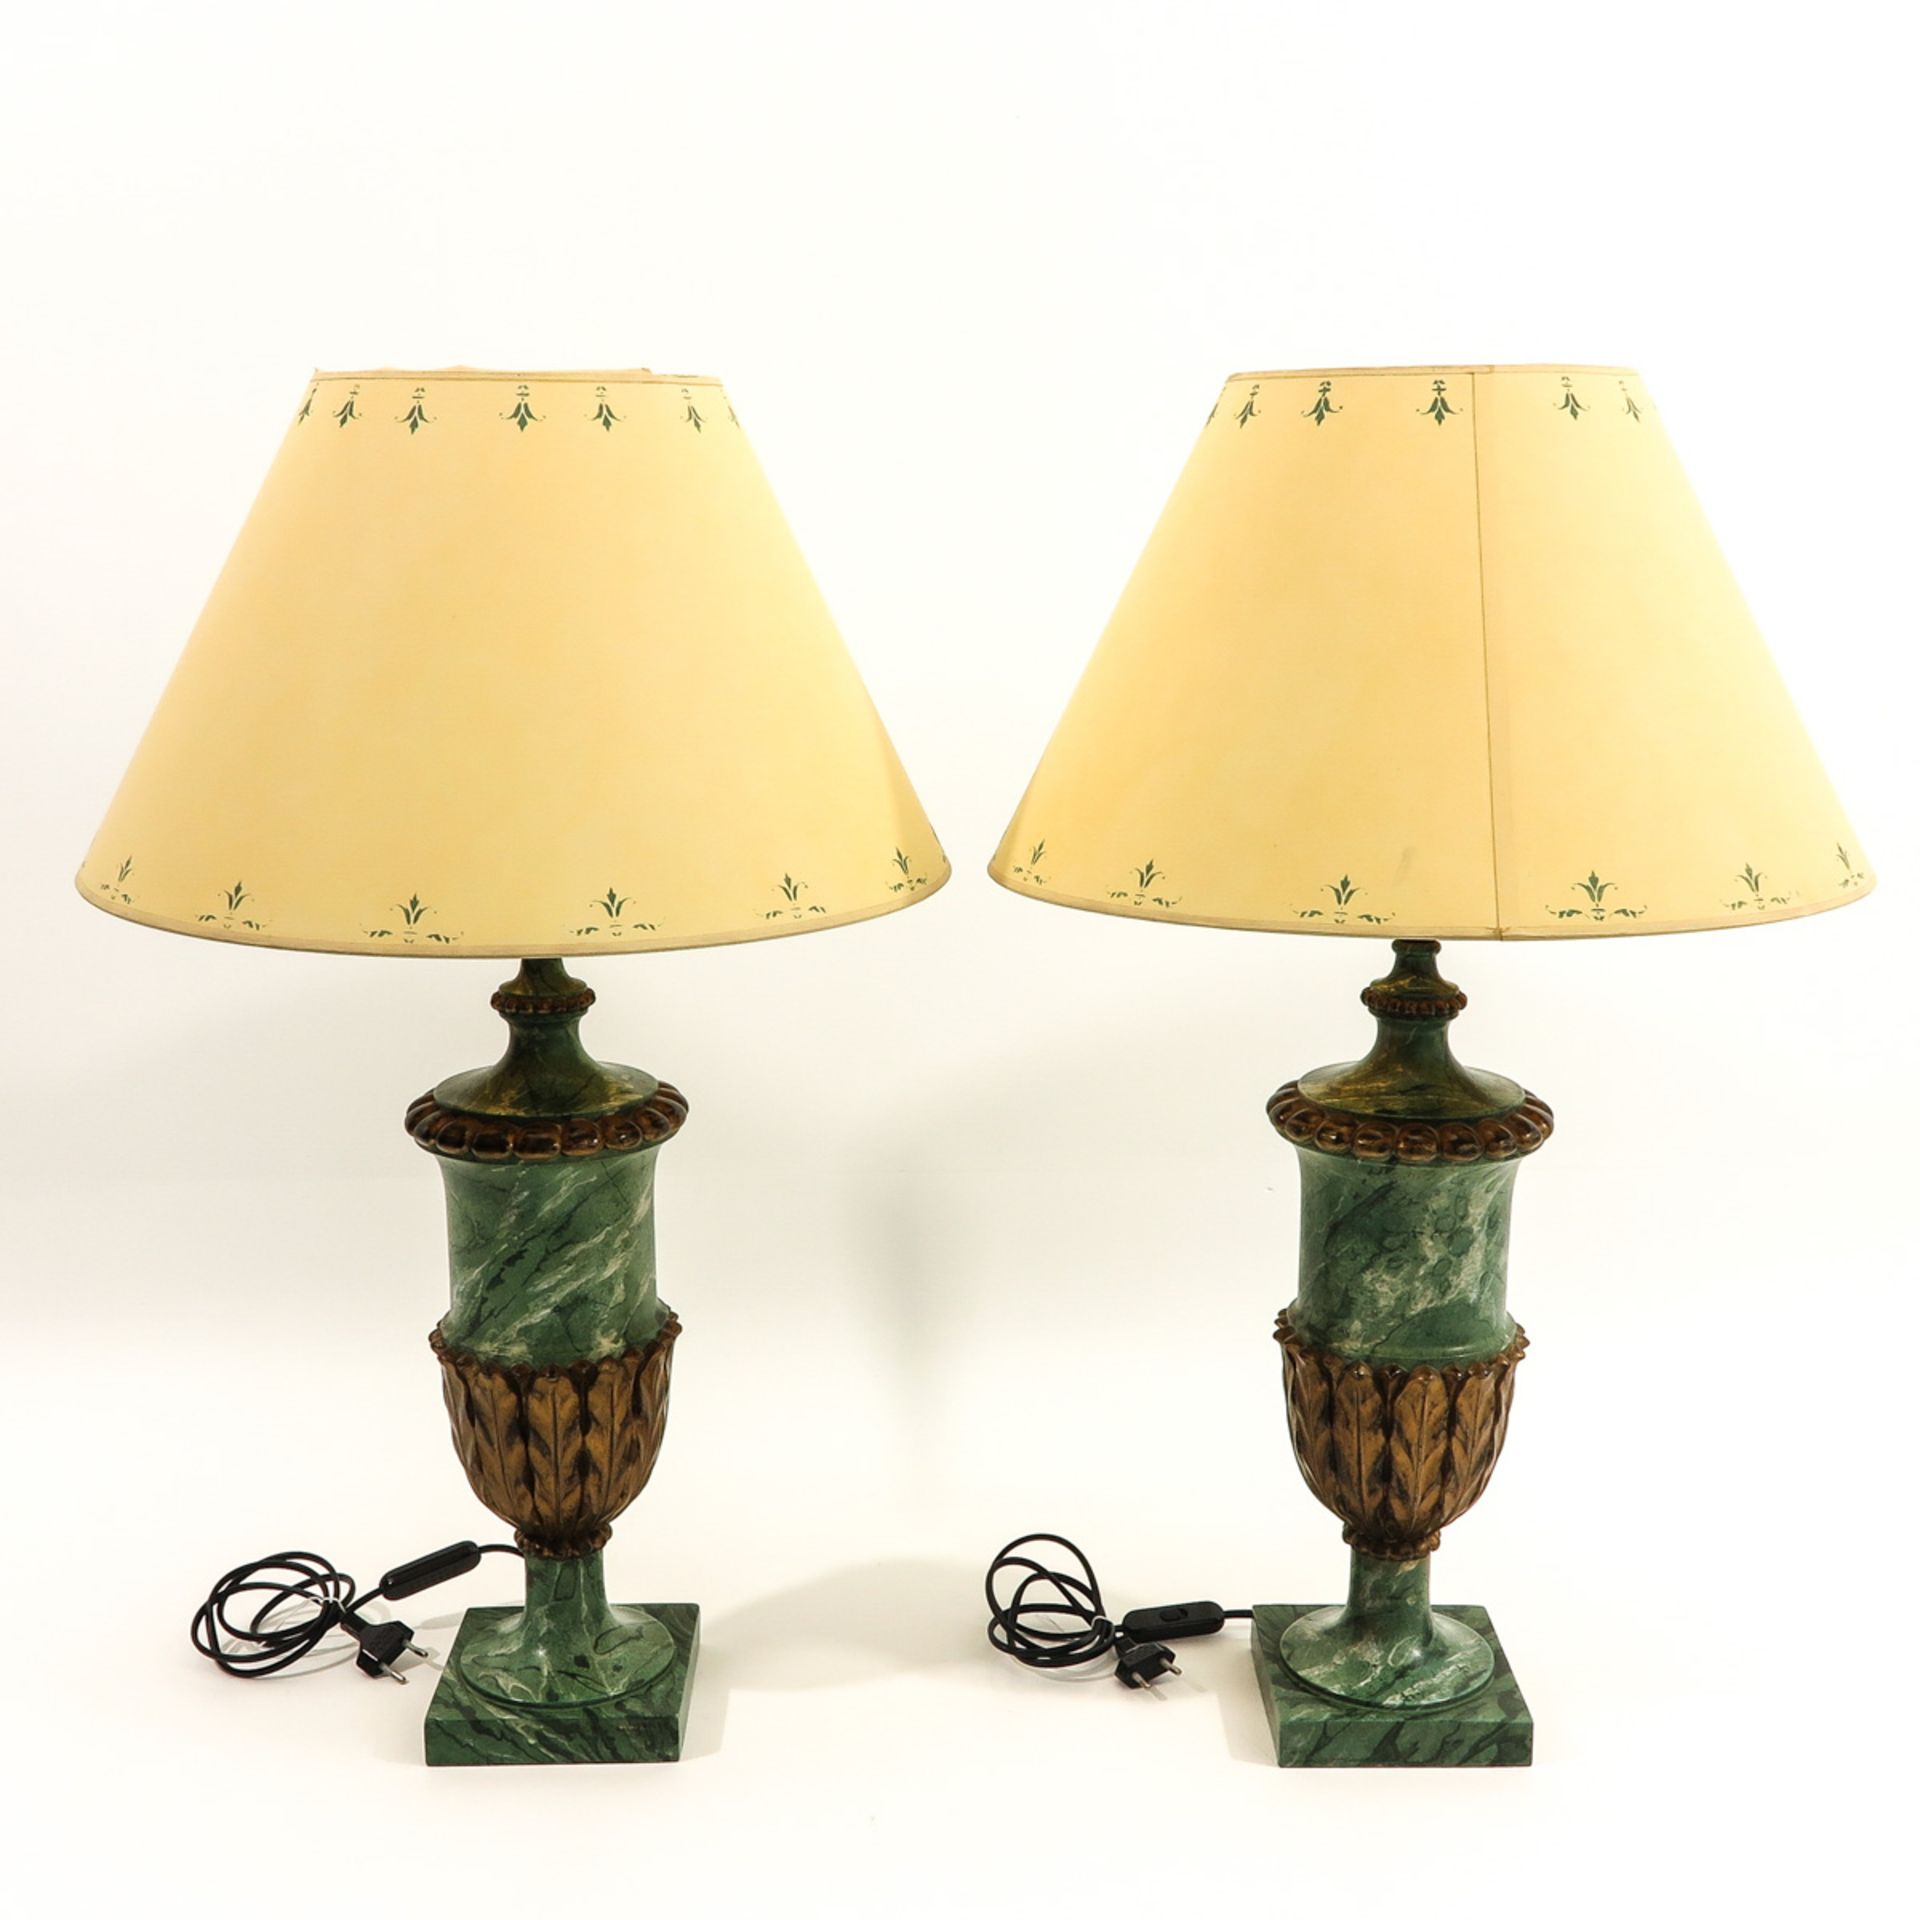 A Lot of 3 Table Lamps - Image 5 of 10